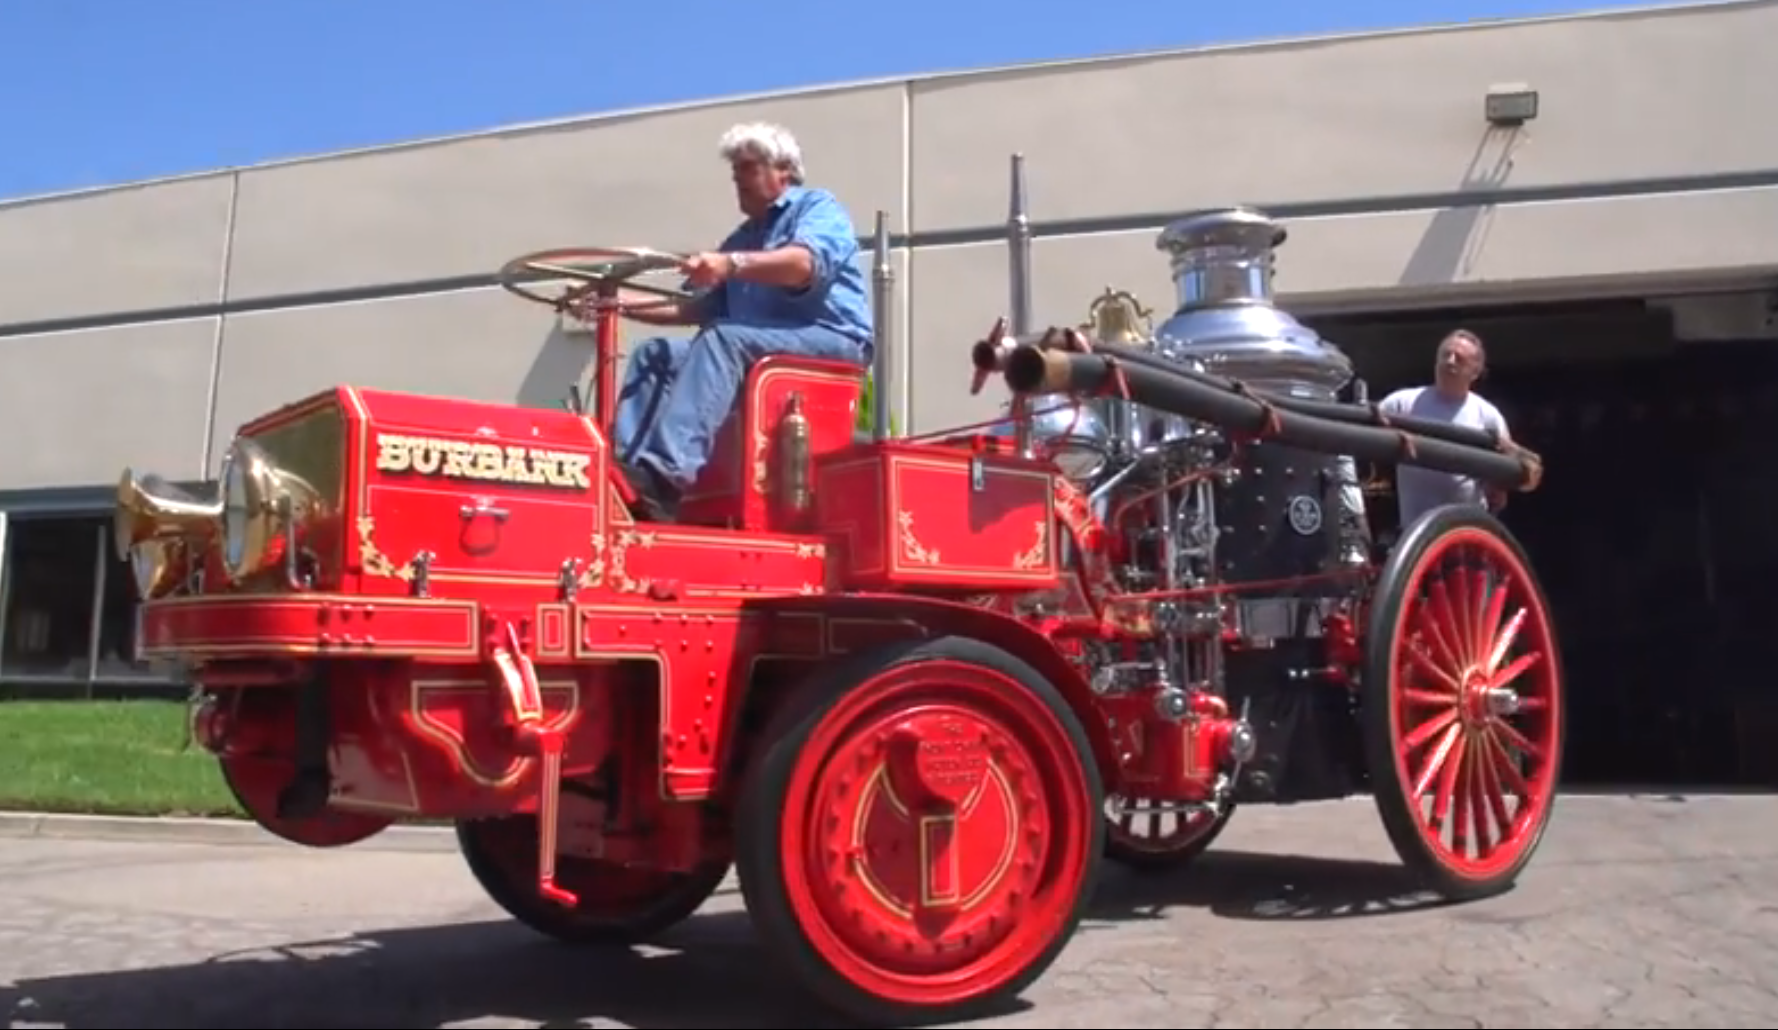 jay-leno-drives-1914-christie-fire-engine-video-68384_1.png